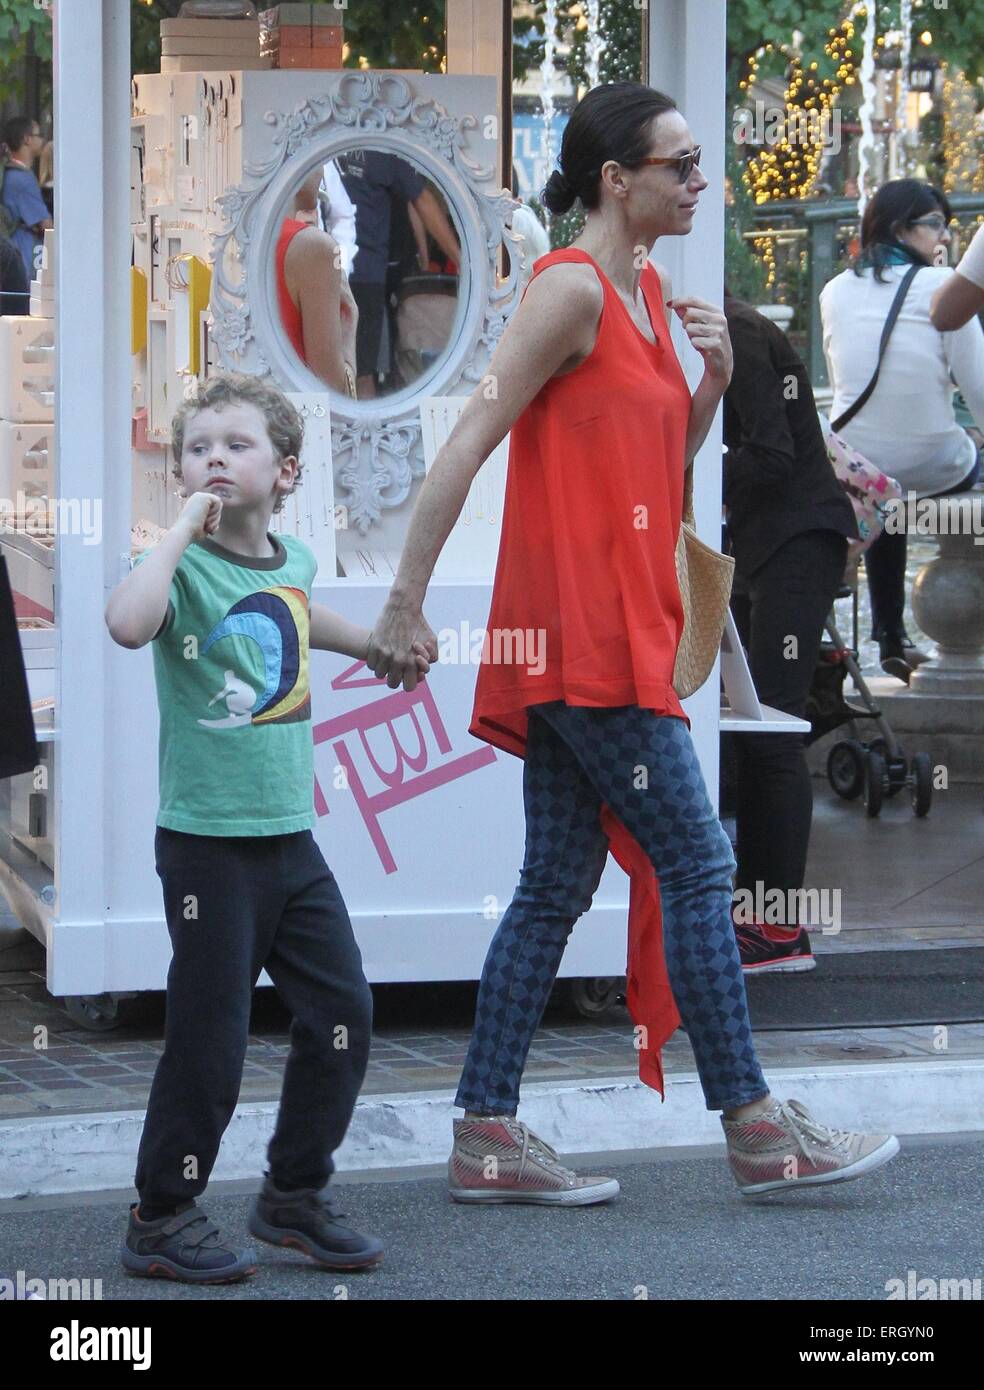 Minnie Driver goes shopping with her family on Black Friday at The Grove  Featuring: Minnie Driver,Henry Story Driver Where: Hollywood, California, United States When: 28 Nov 2014 Credit: WENN.com Stock Photo